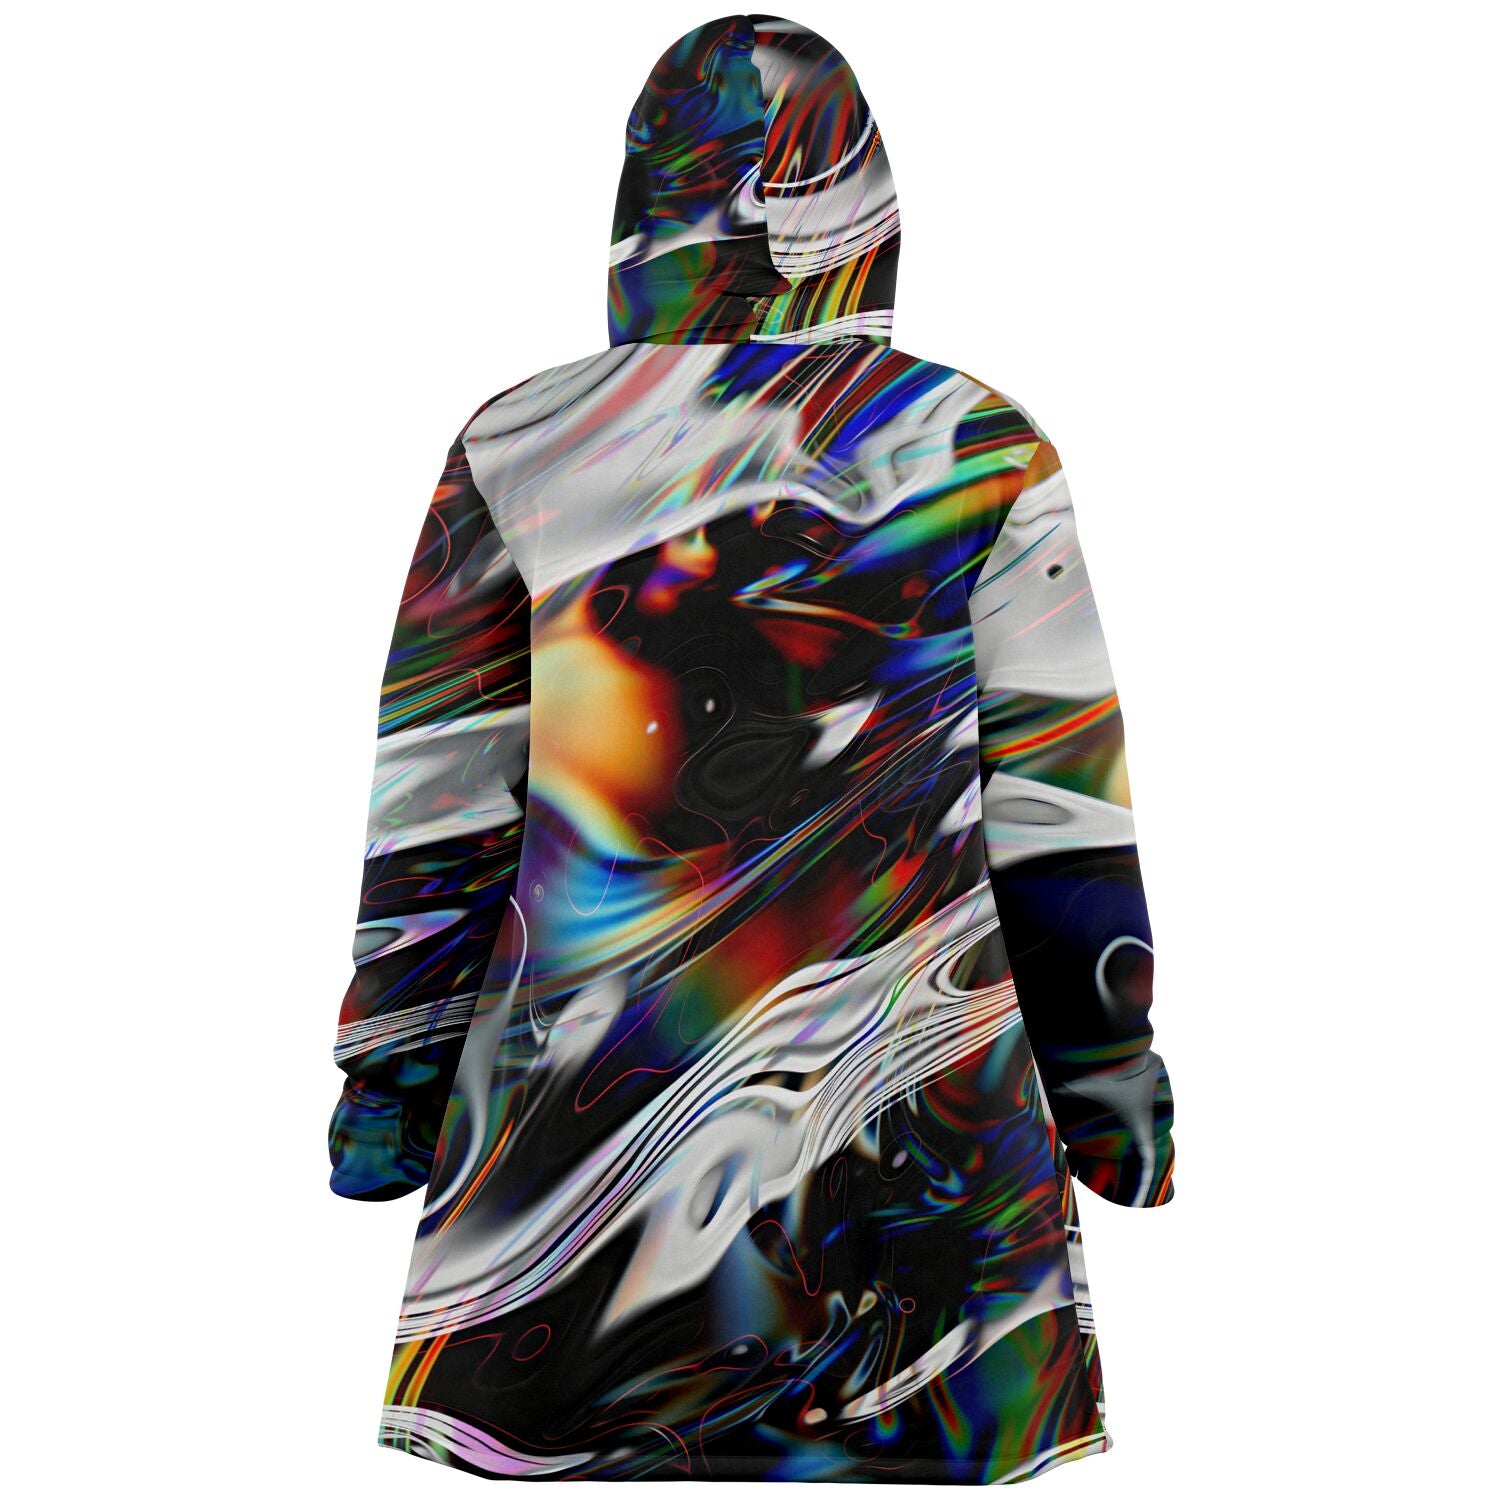 A women's hooded coat, the Glitch Rave Cloak, with a colorful abstract design.